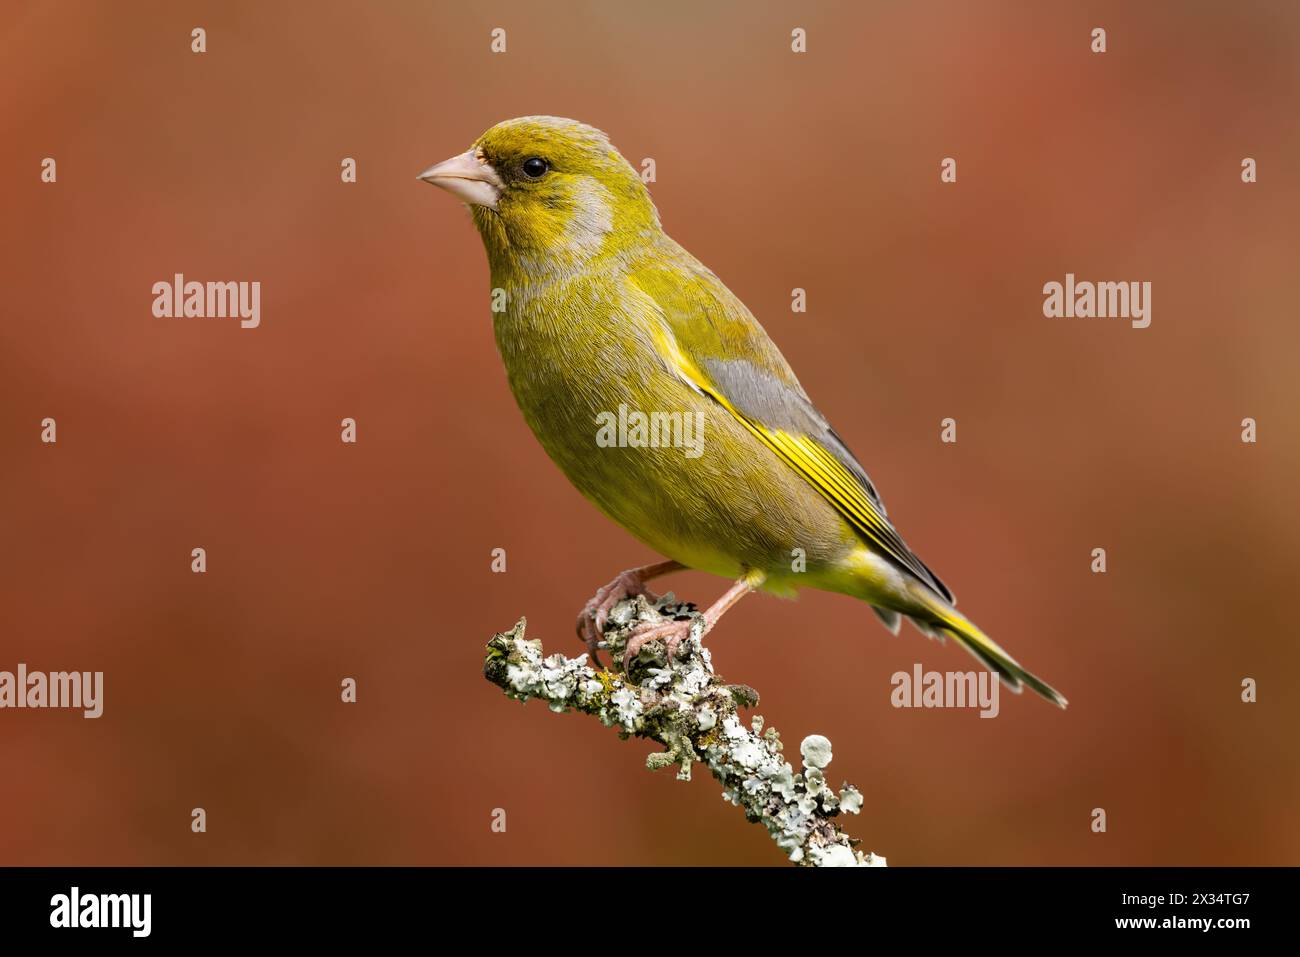 Greenfinch perched on a Lichen covered twig with a red background Stock Photo